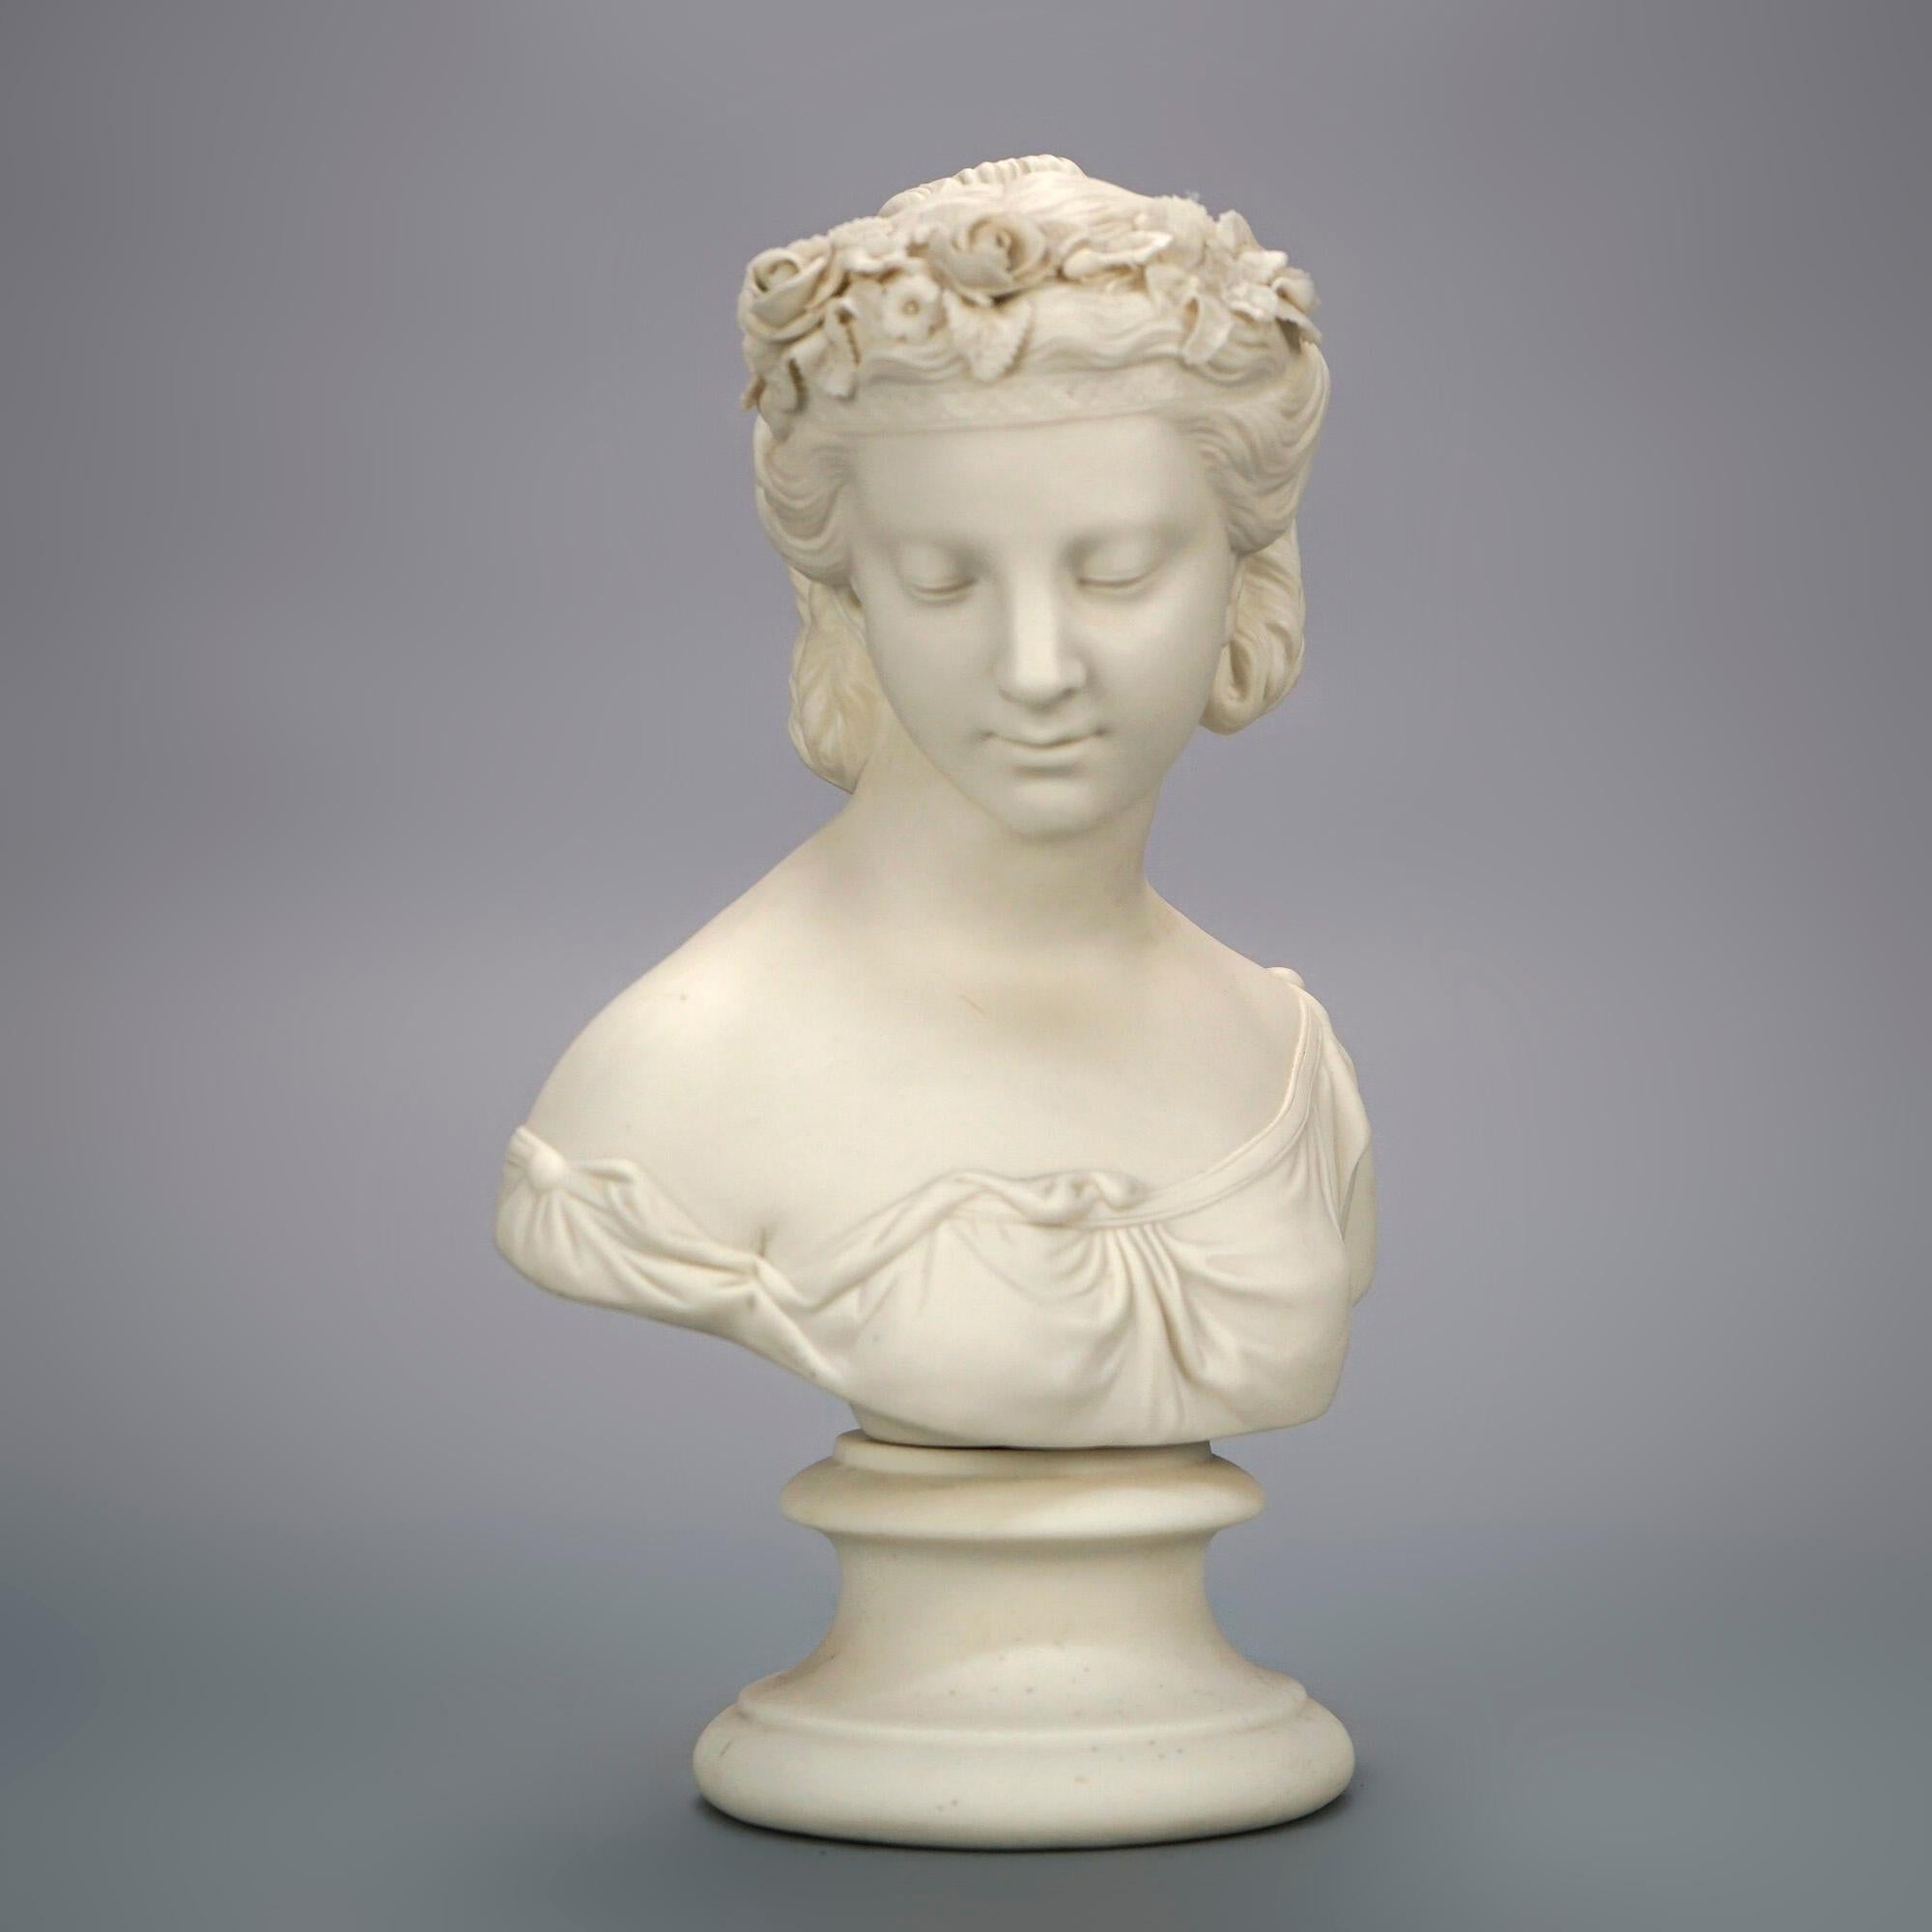 19th Century Antique Parian Sculpture Bust of a Classical Young Woman 19th C